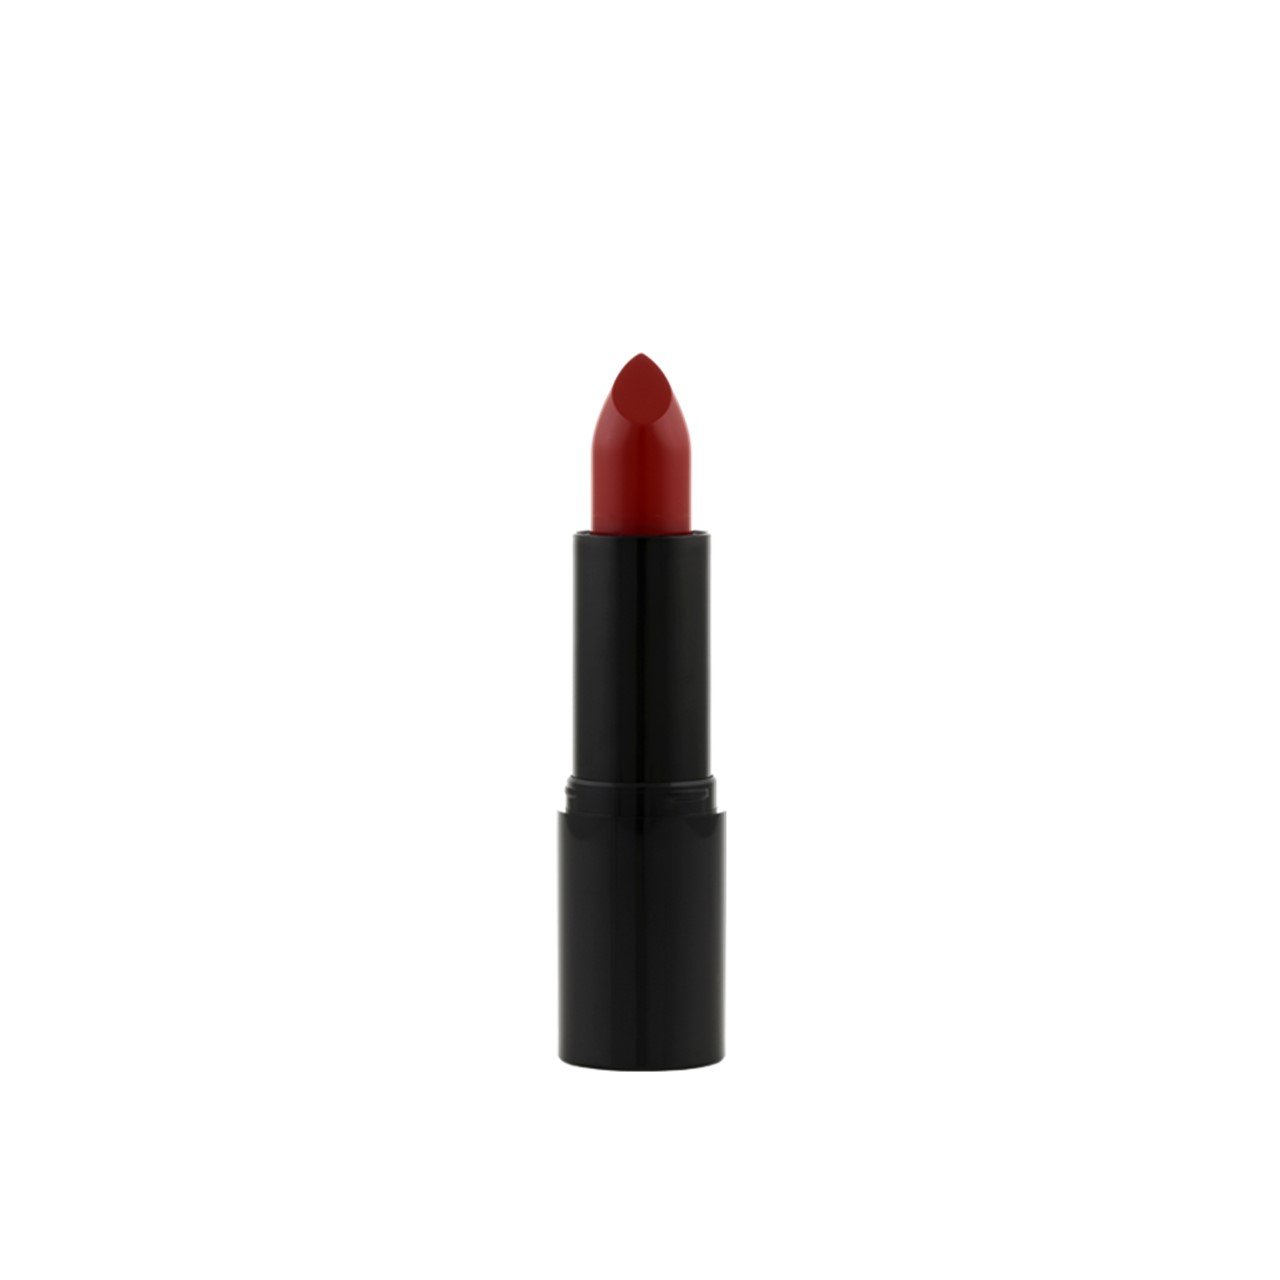 Skinerie Lips Lipstick 10 Late Night Rouge 3.5g